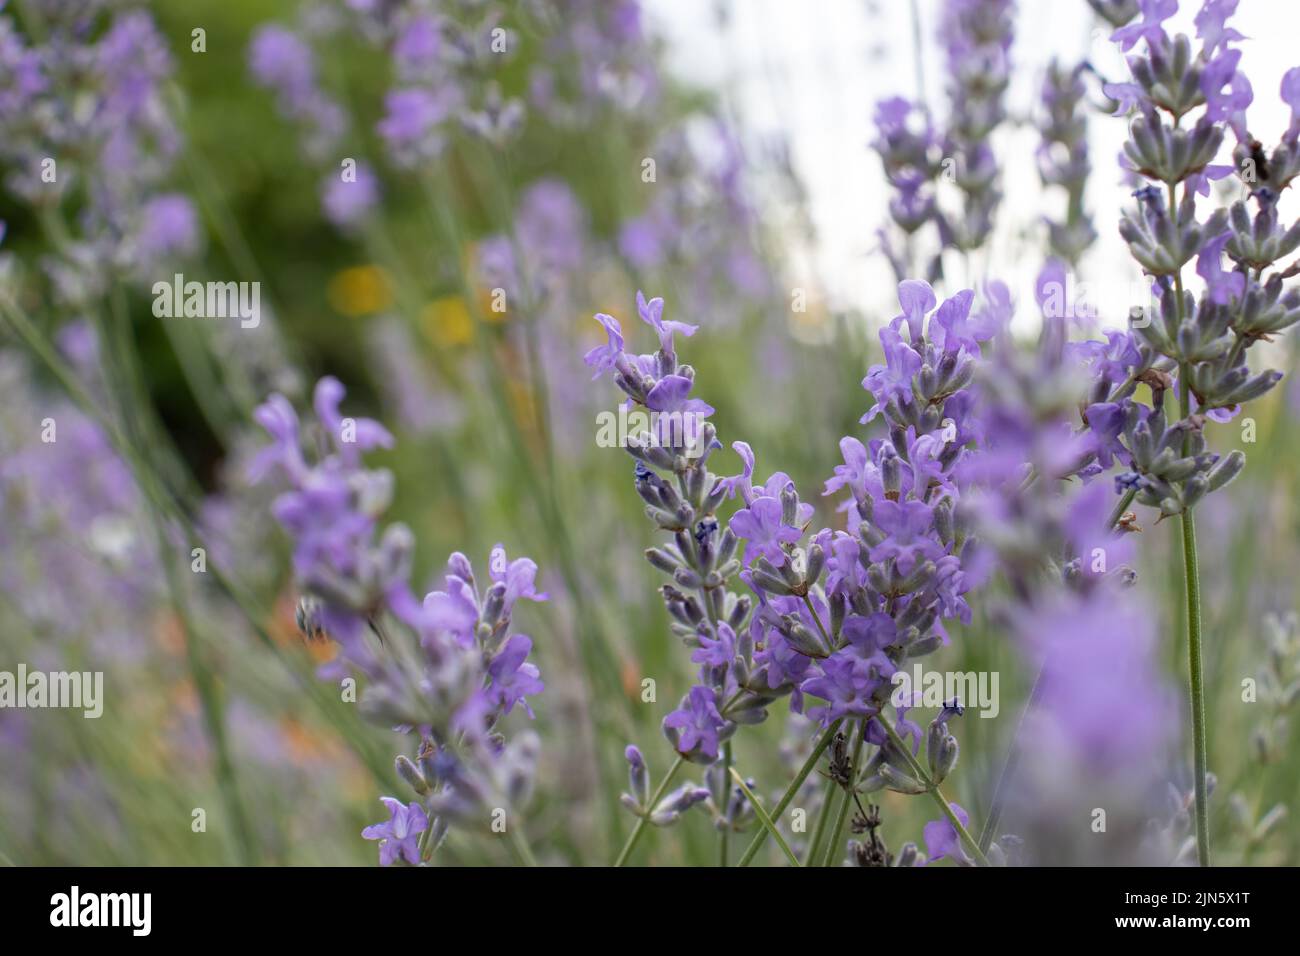 Purple Lavender flowers in the summer garden. Natural blurred floral background. Lavender field. Stock Photo